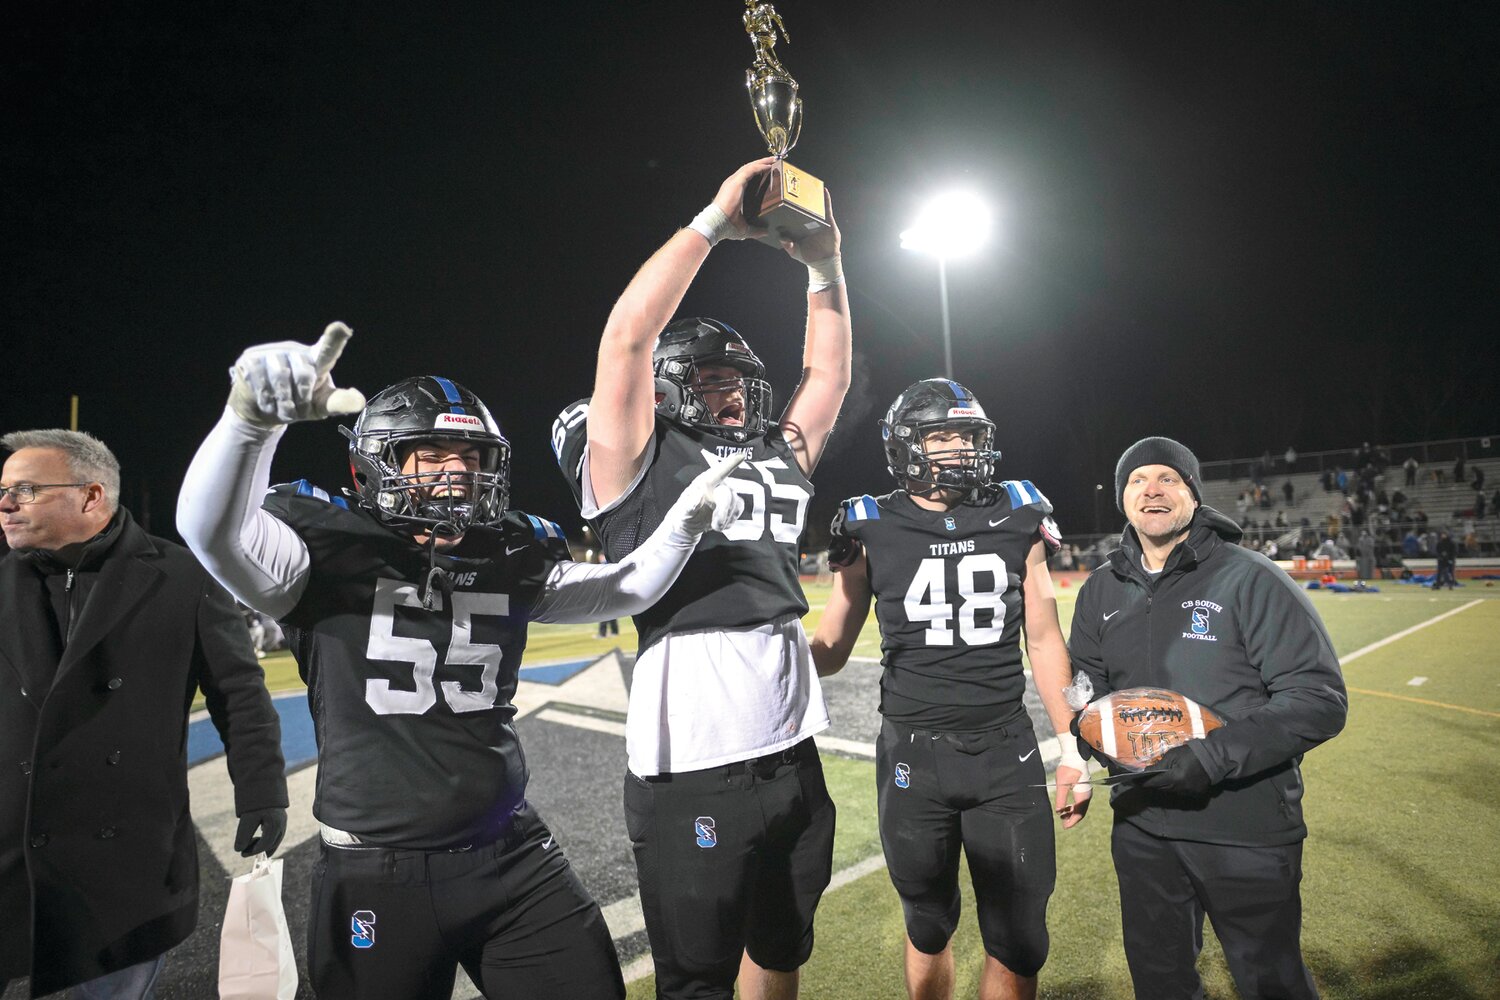 Central Bucks South captains Rolan Hess, Collin Goetter and Sean Moskowitz, and coach Tom Hetrick celebrate after getting the championship trophy.